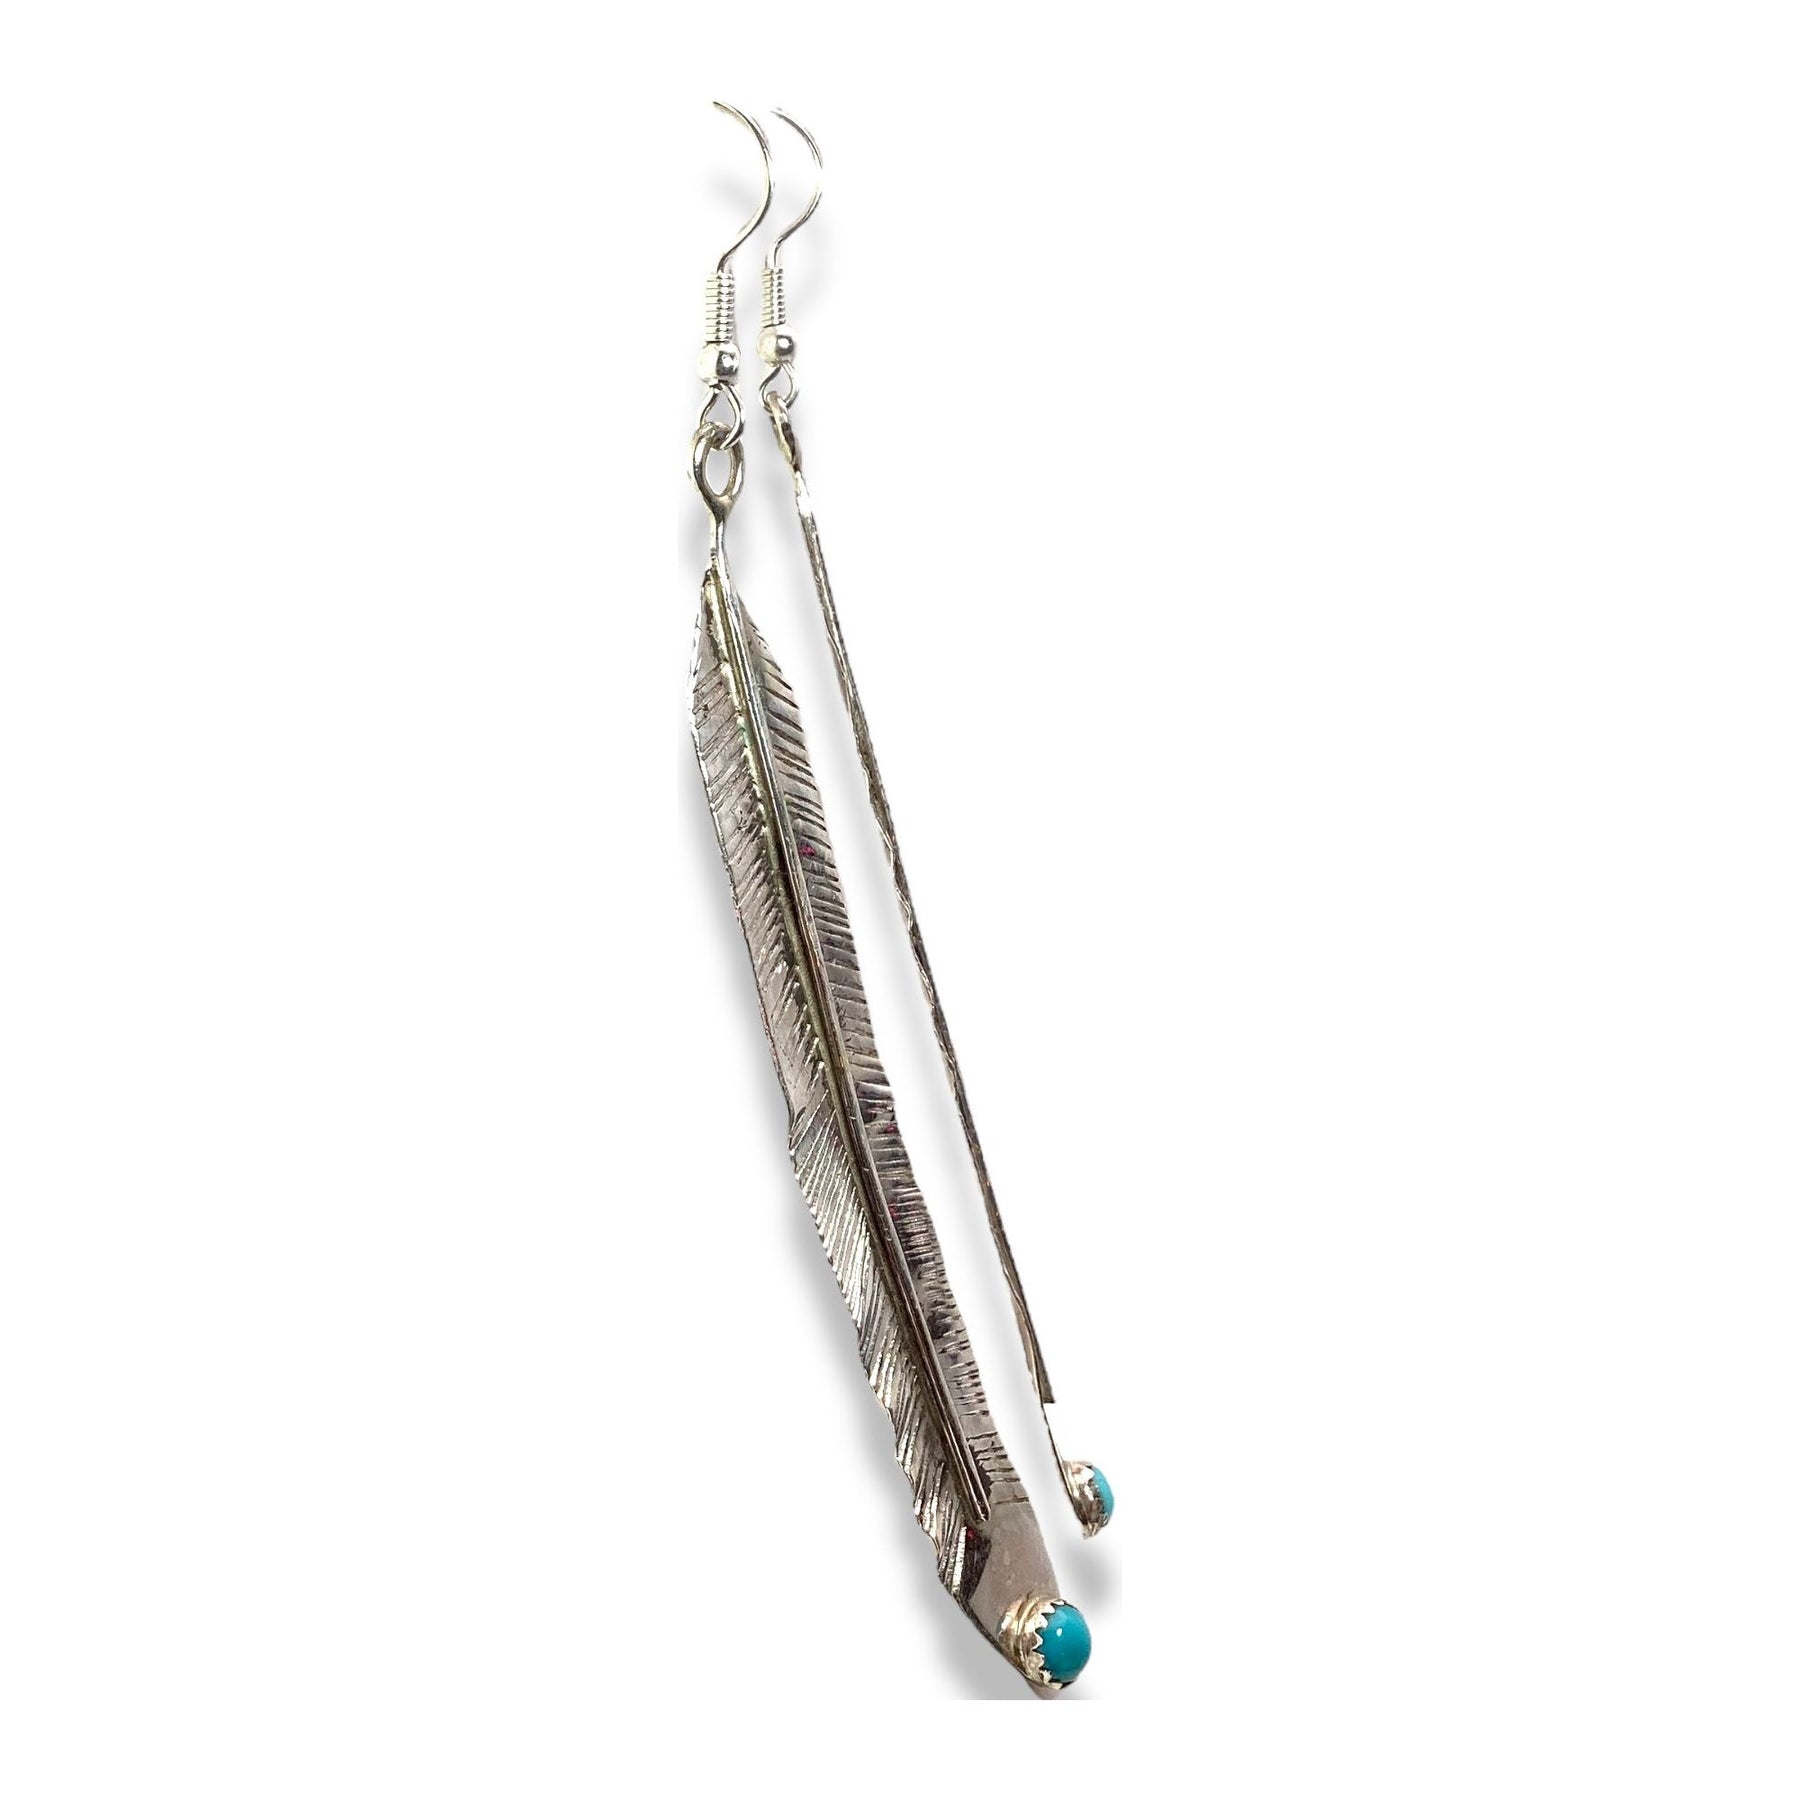 Authentic Turquoise & Sterling Silver Feather Earrings by Jonah Begay ...